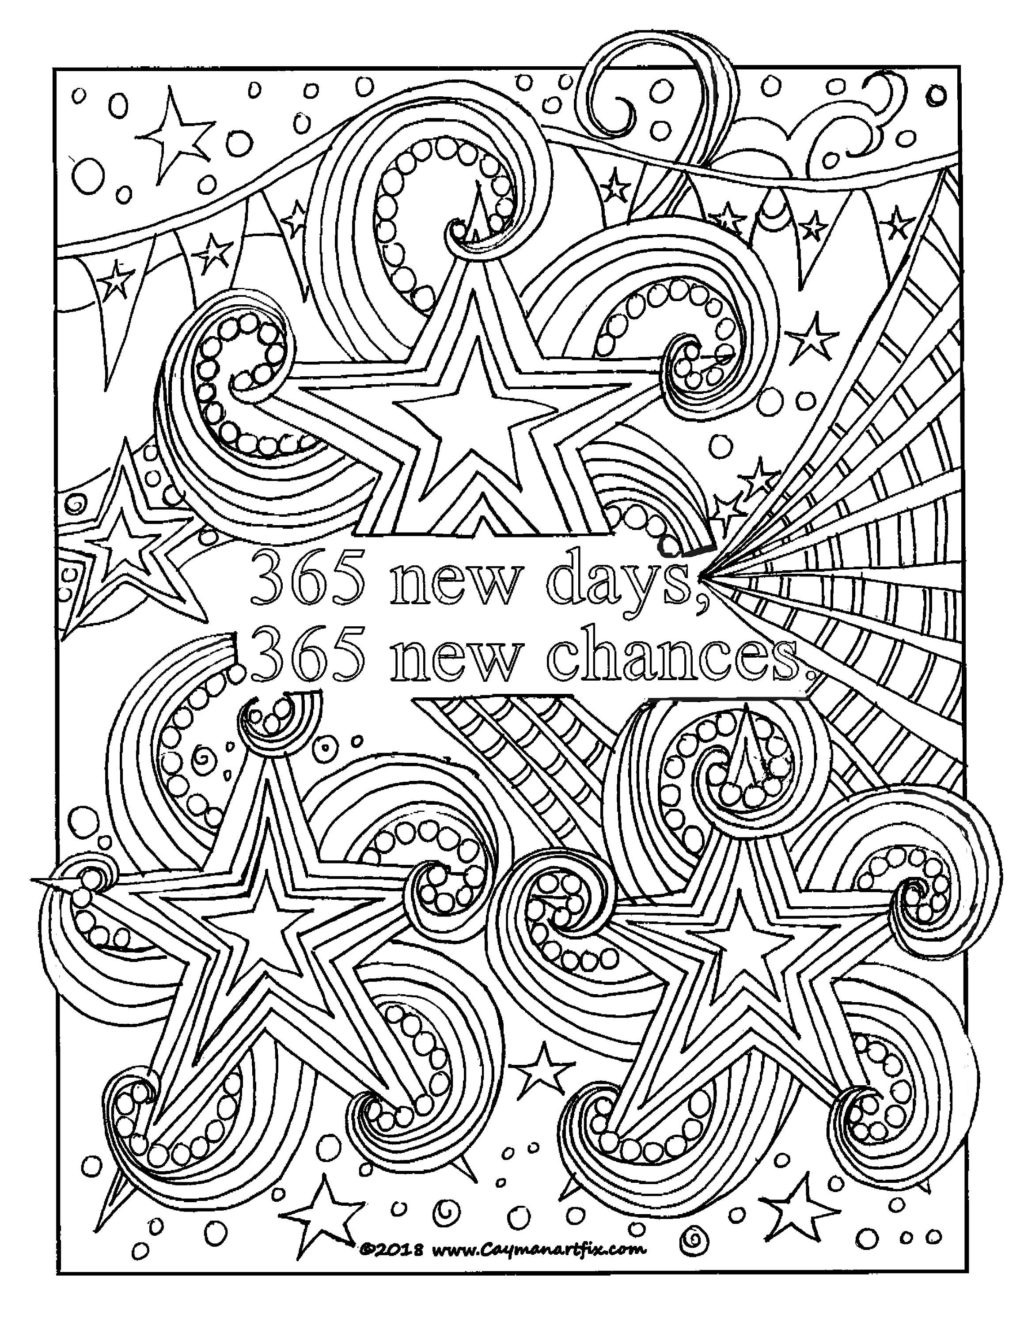 Free Printable Coloring Pages With Quotes Coloring Book World Printable Coloring Pages With Quotes Funny For